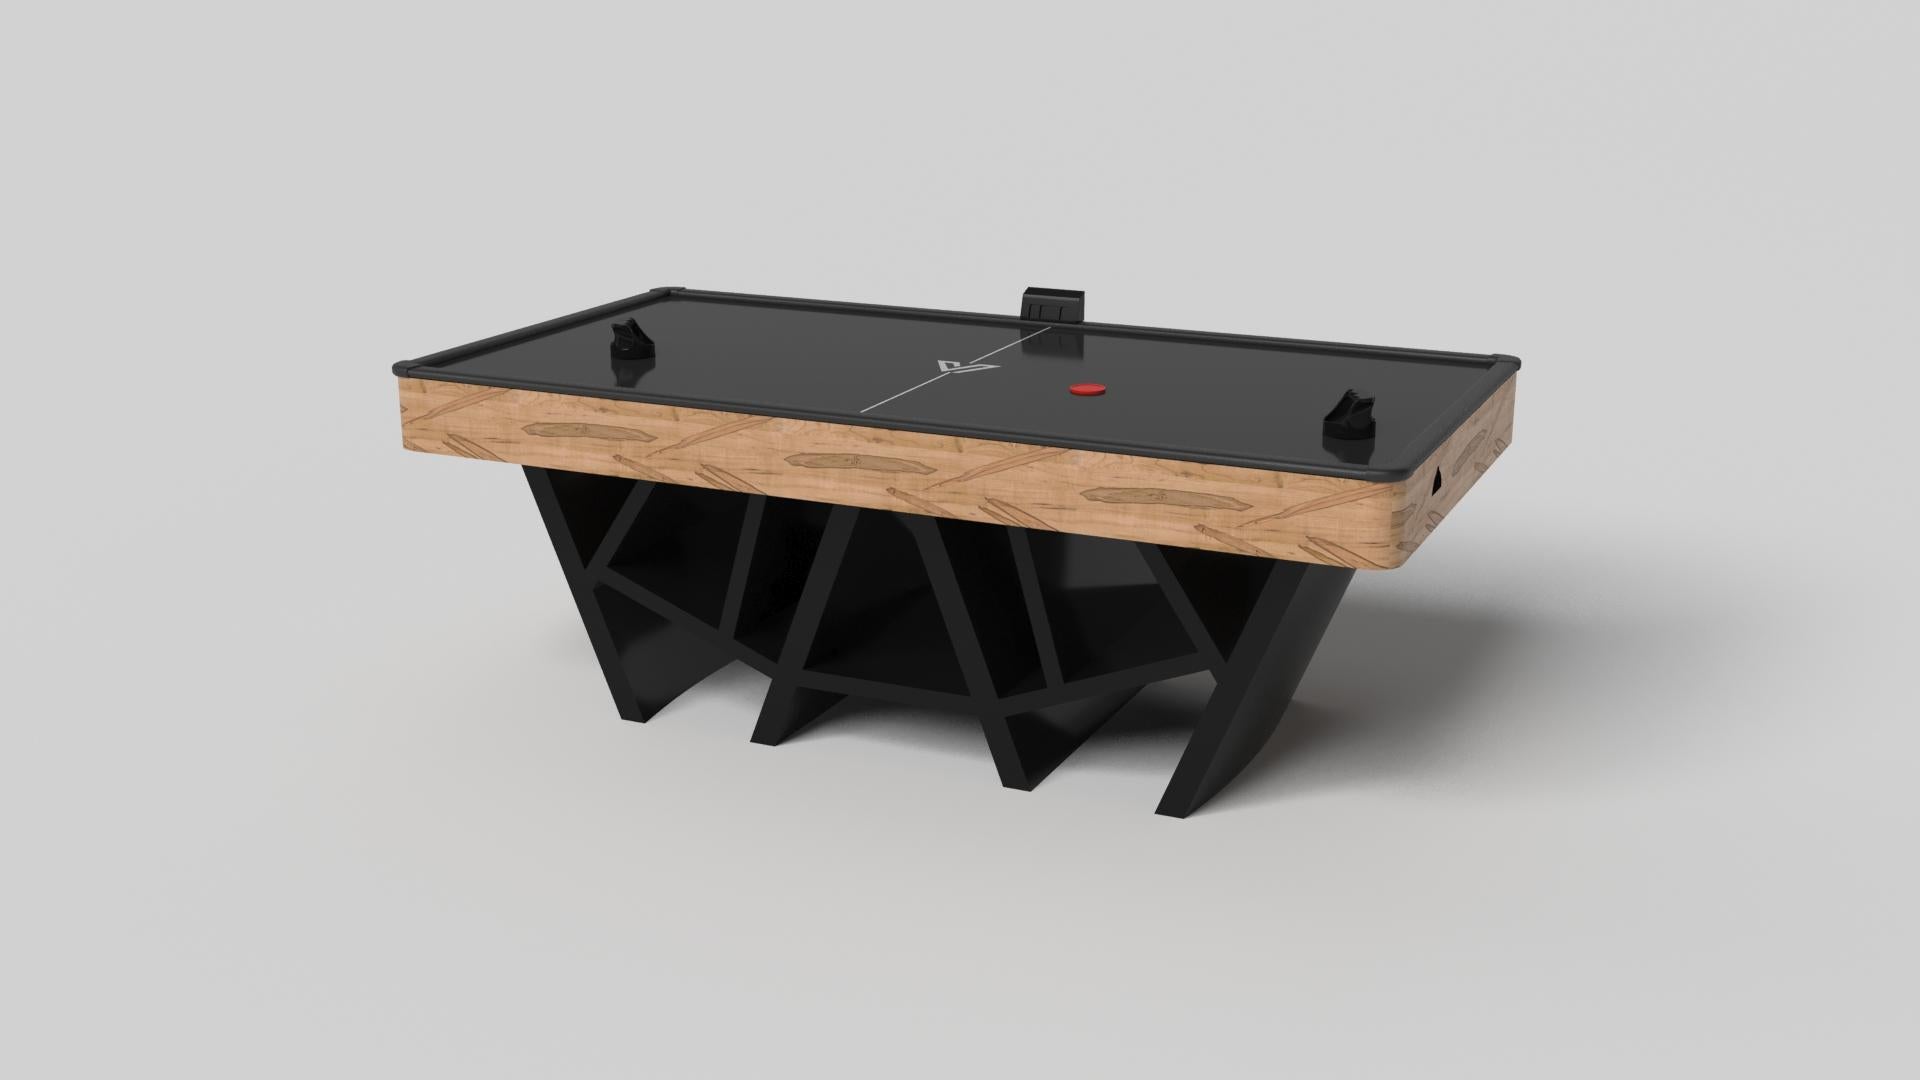 With a combination of acute angles, smooth lines, and geometric configurations, the Maze air hockey table in walnut is characterized by a labyrinth-inspired base with a mystifying motif. Beautifully detailed with a smooth black top for game play,